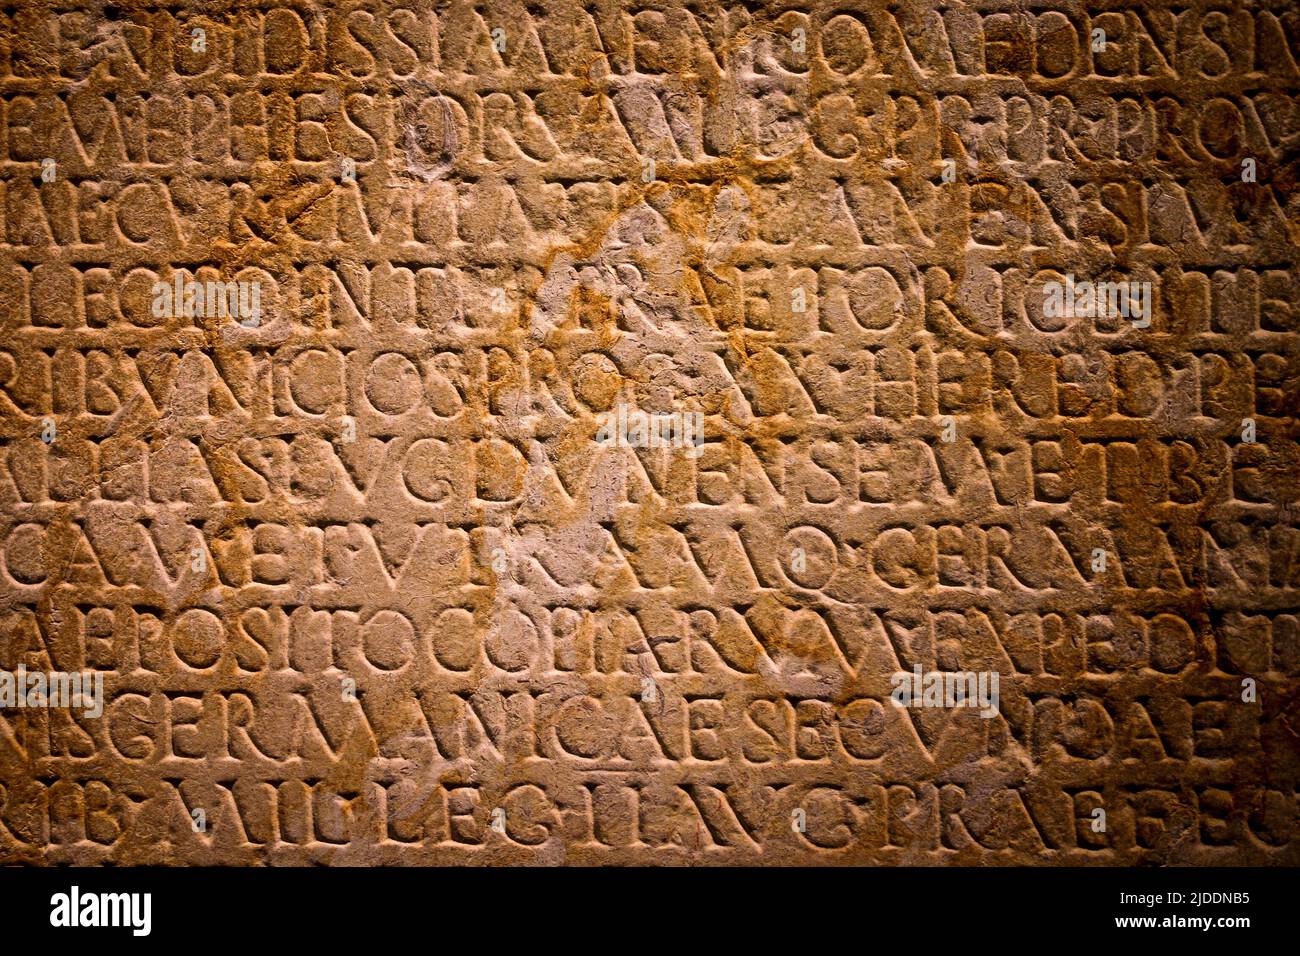 Latin text written in stone. Full frame Roman text carved into a flat stone wall. Stock Photo